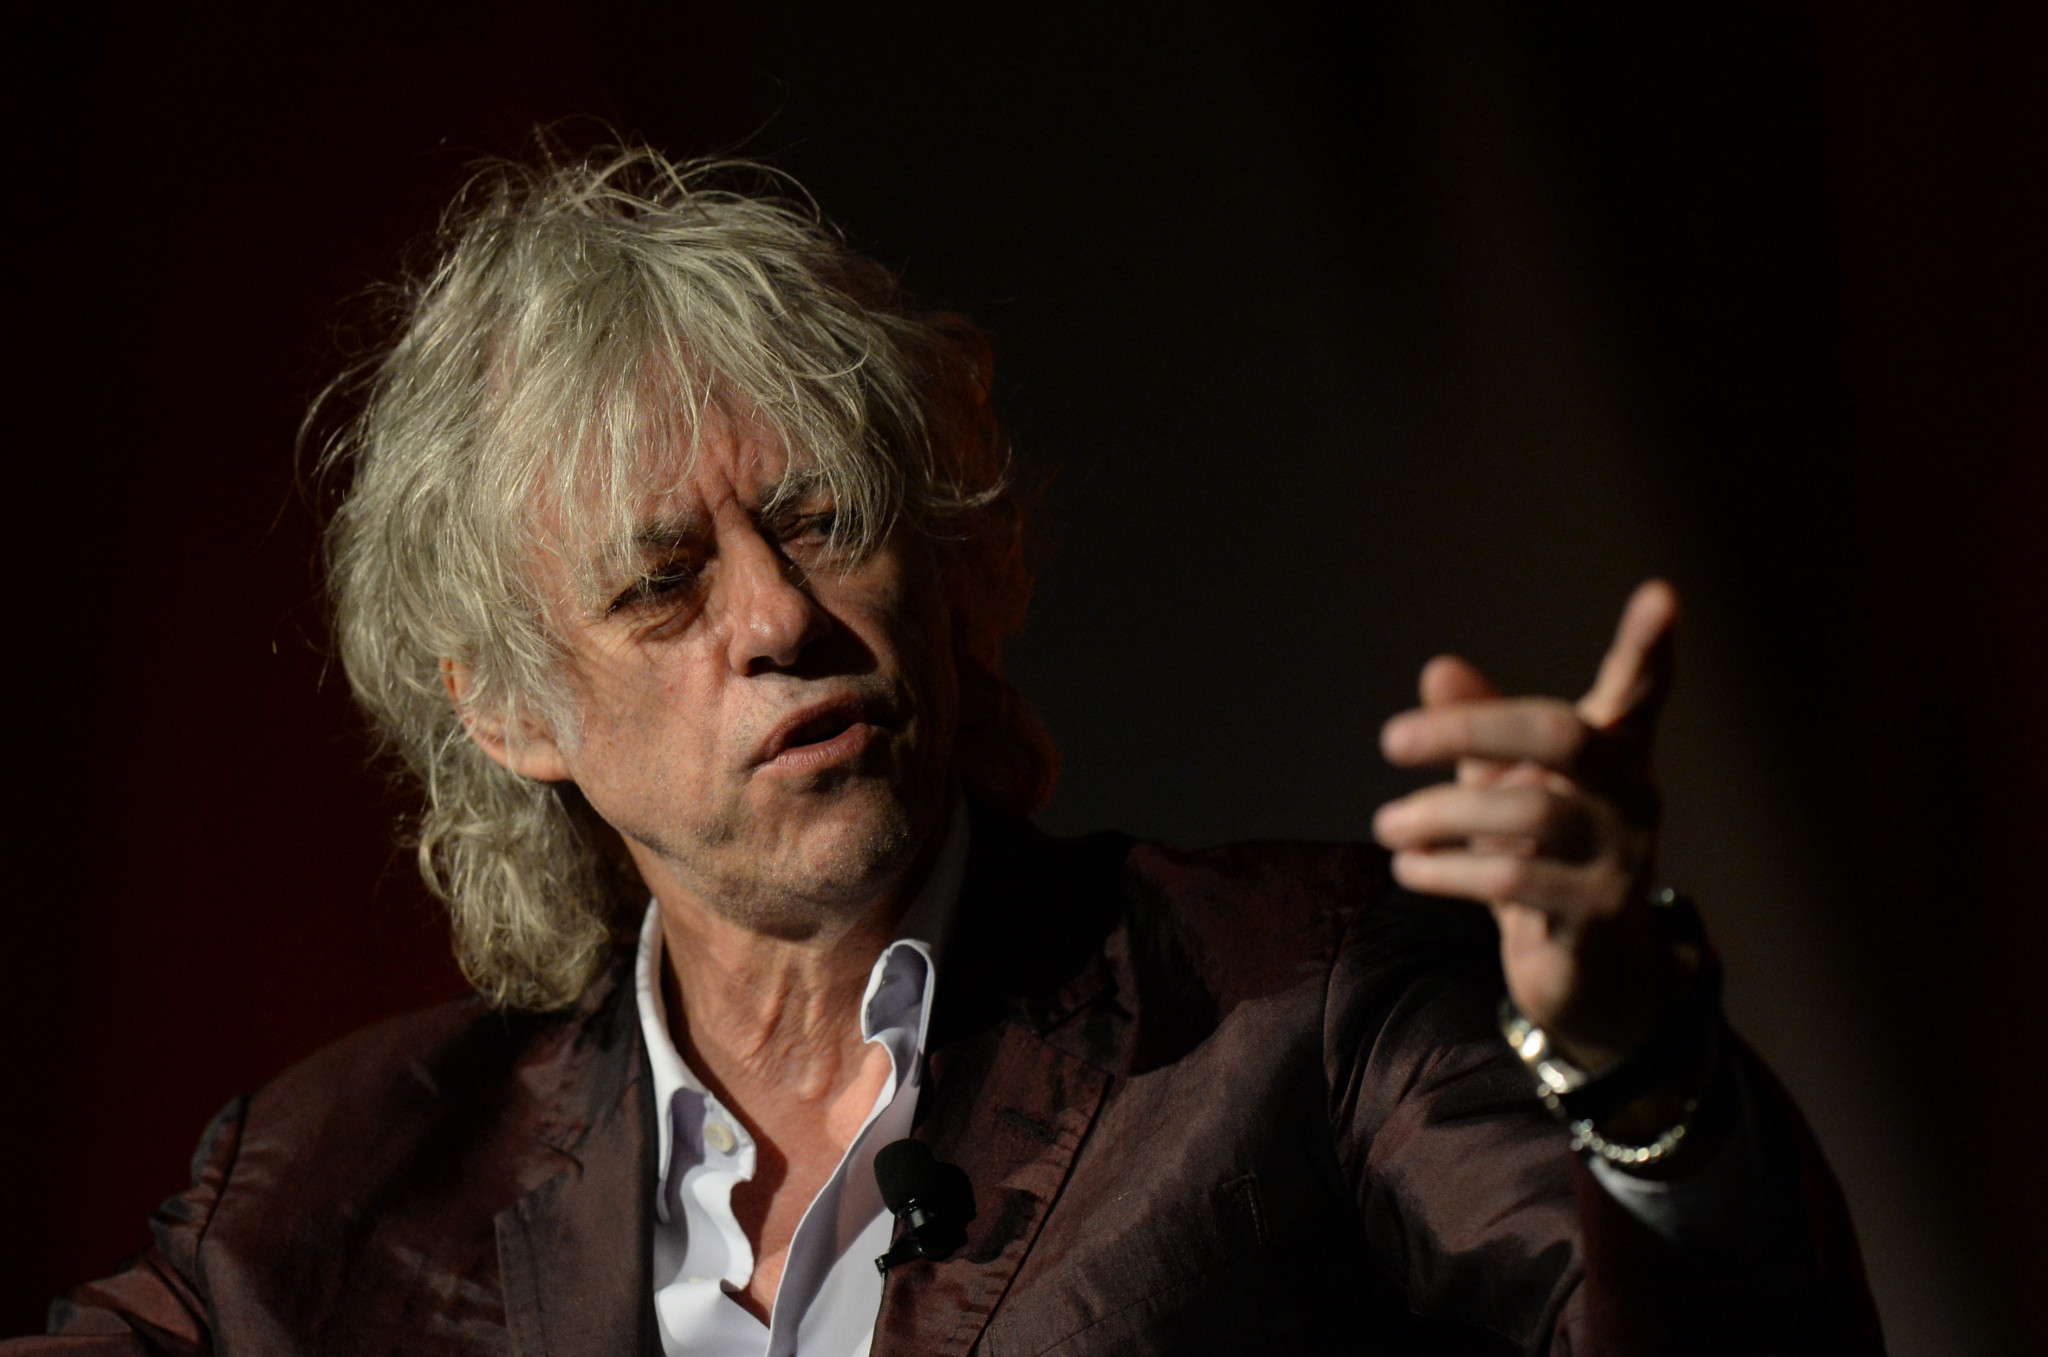 Sir Bob Geldof criticised Queensland Premier Annastacia Palaszczuk during an interview last month over Brisbane's target of staging an environmentally friendly Olympic and Paralympic Games ©Getty Images